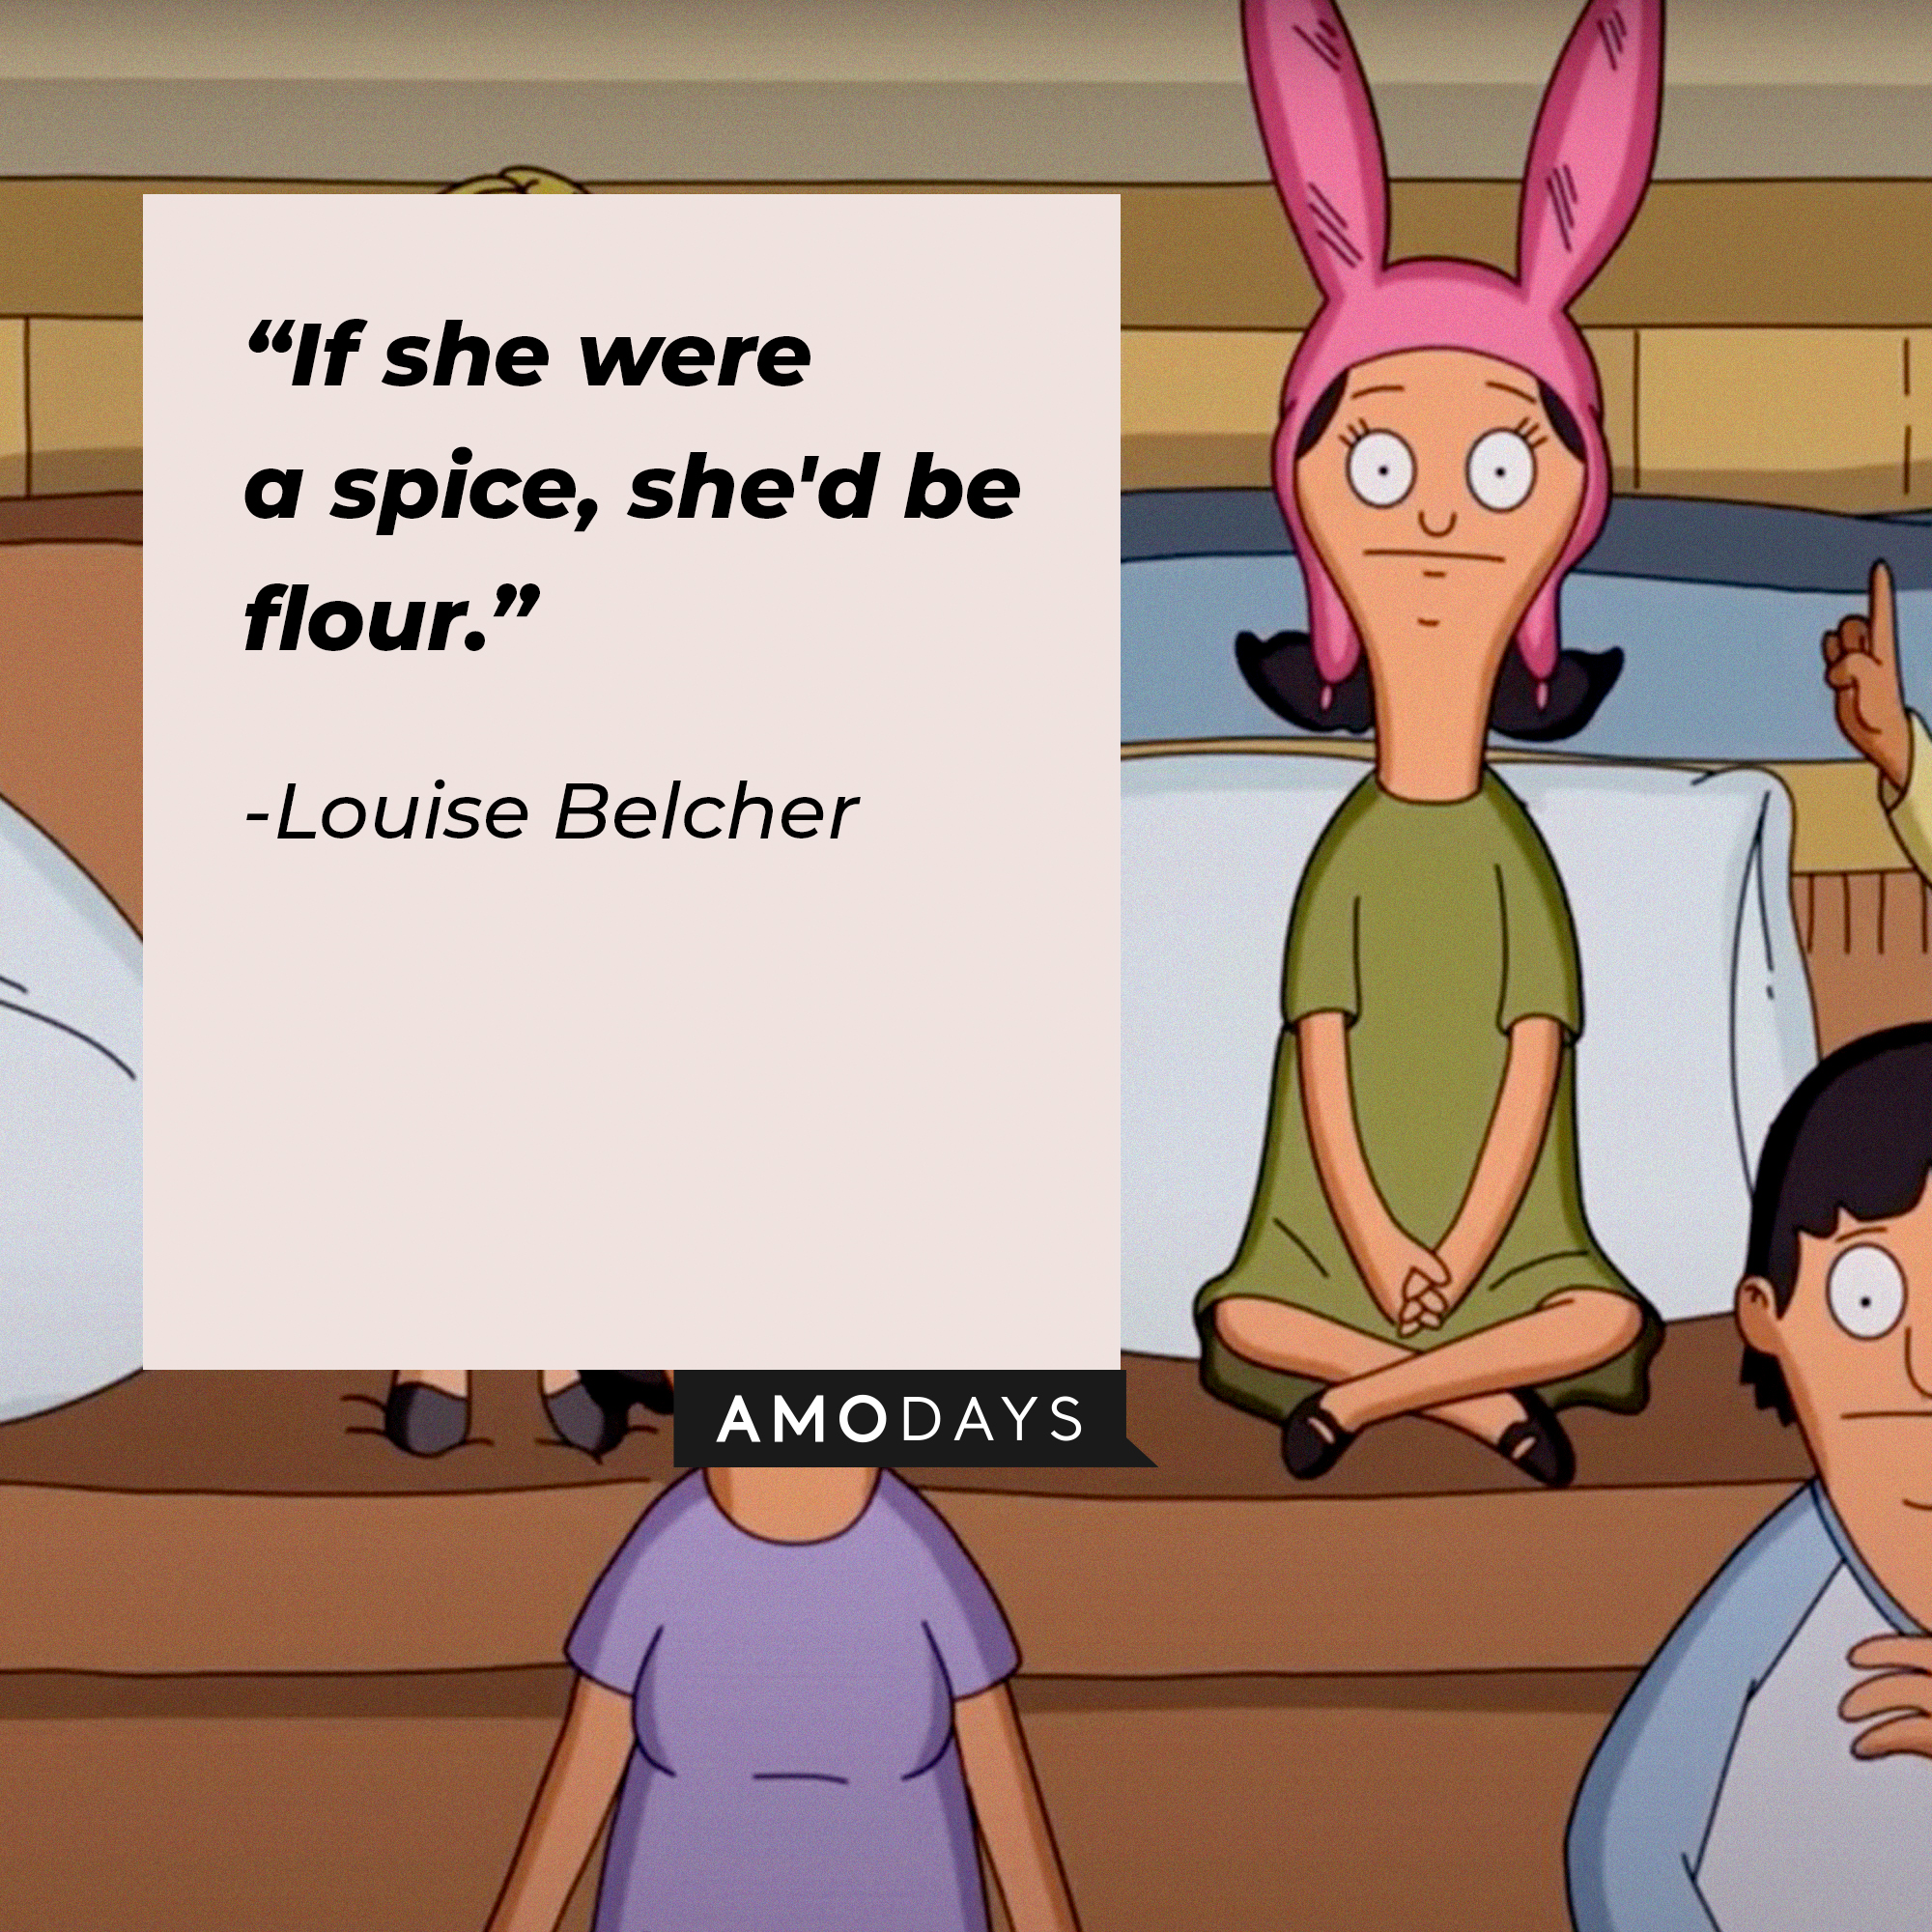 An image of Louise Belcher with her quote: “If she were a spice, she'd be flour.” | Source:  facebook.com/BobsBurgers